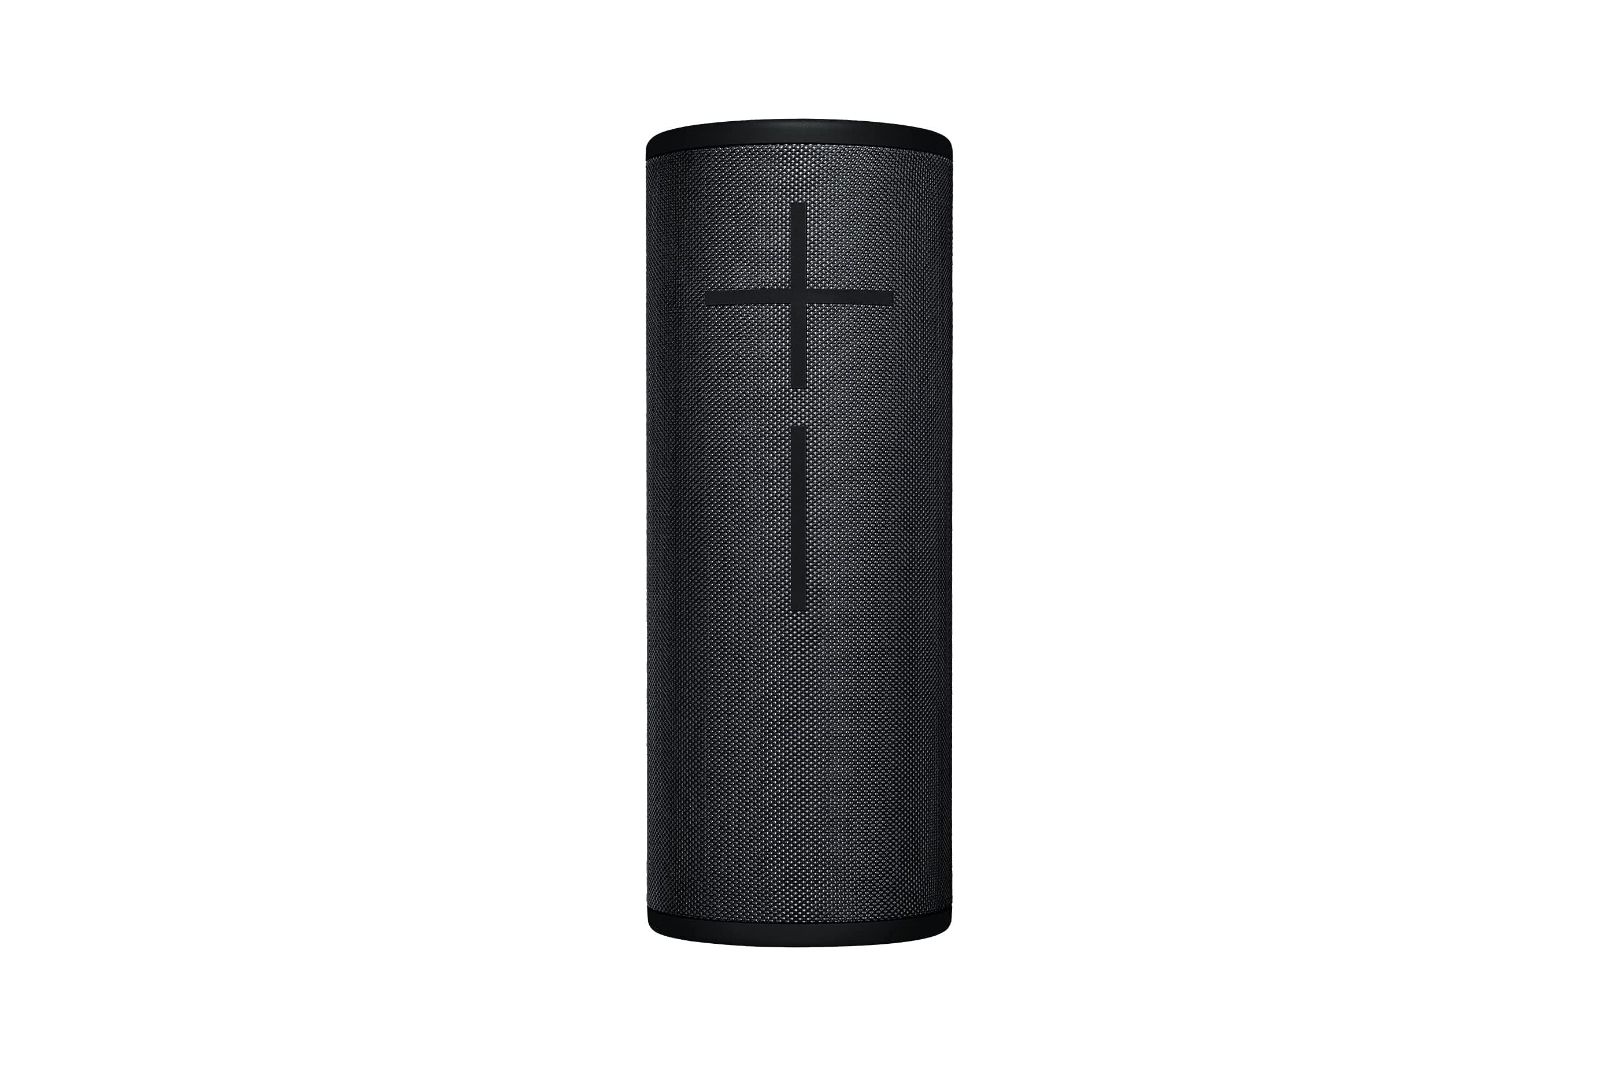 A black and grey wireless speaker with a plus and a minus button on the side for controlling the volume.